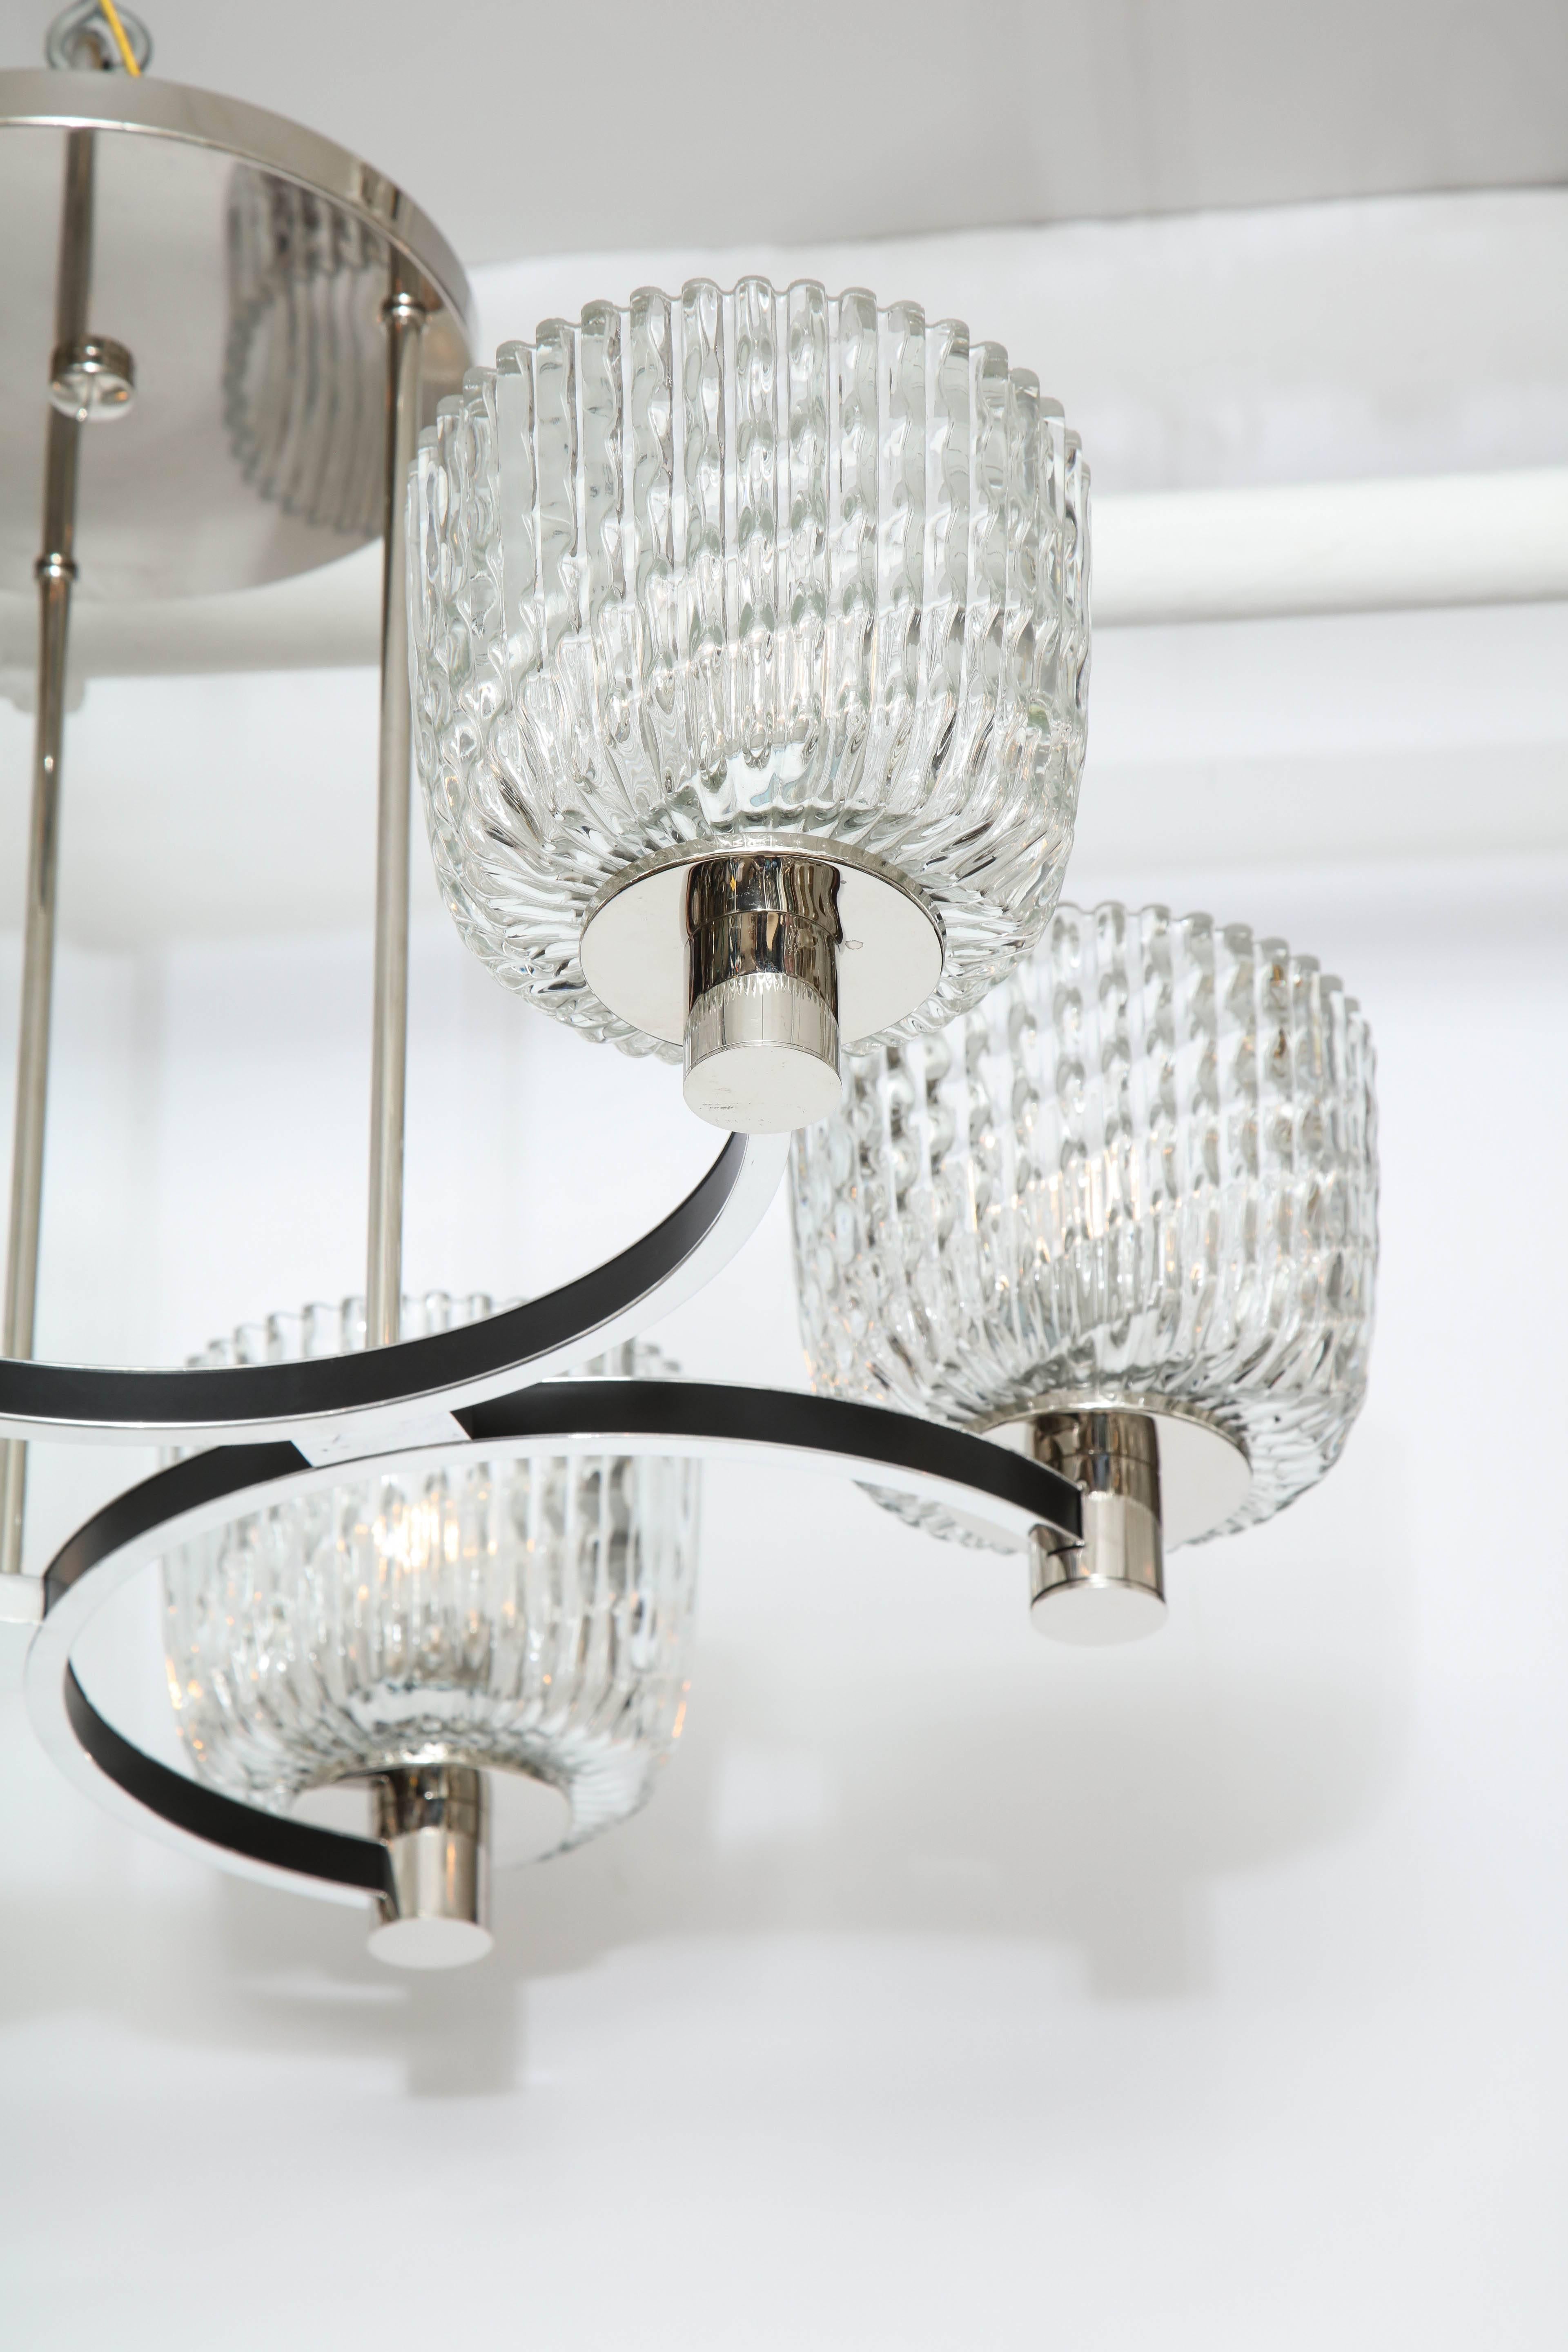 Beautiful Art Deco influenced style chandelier.
The polished chrome frame supports six large rippled glass shades. The fixture has been newly rewired for the US and takes standard size light bulbs (40 watts per socket).